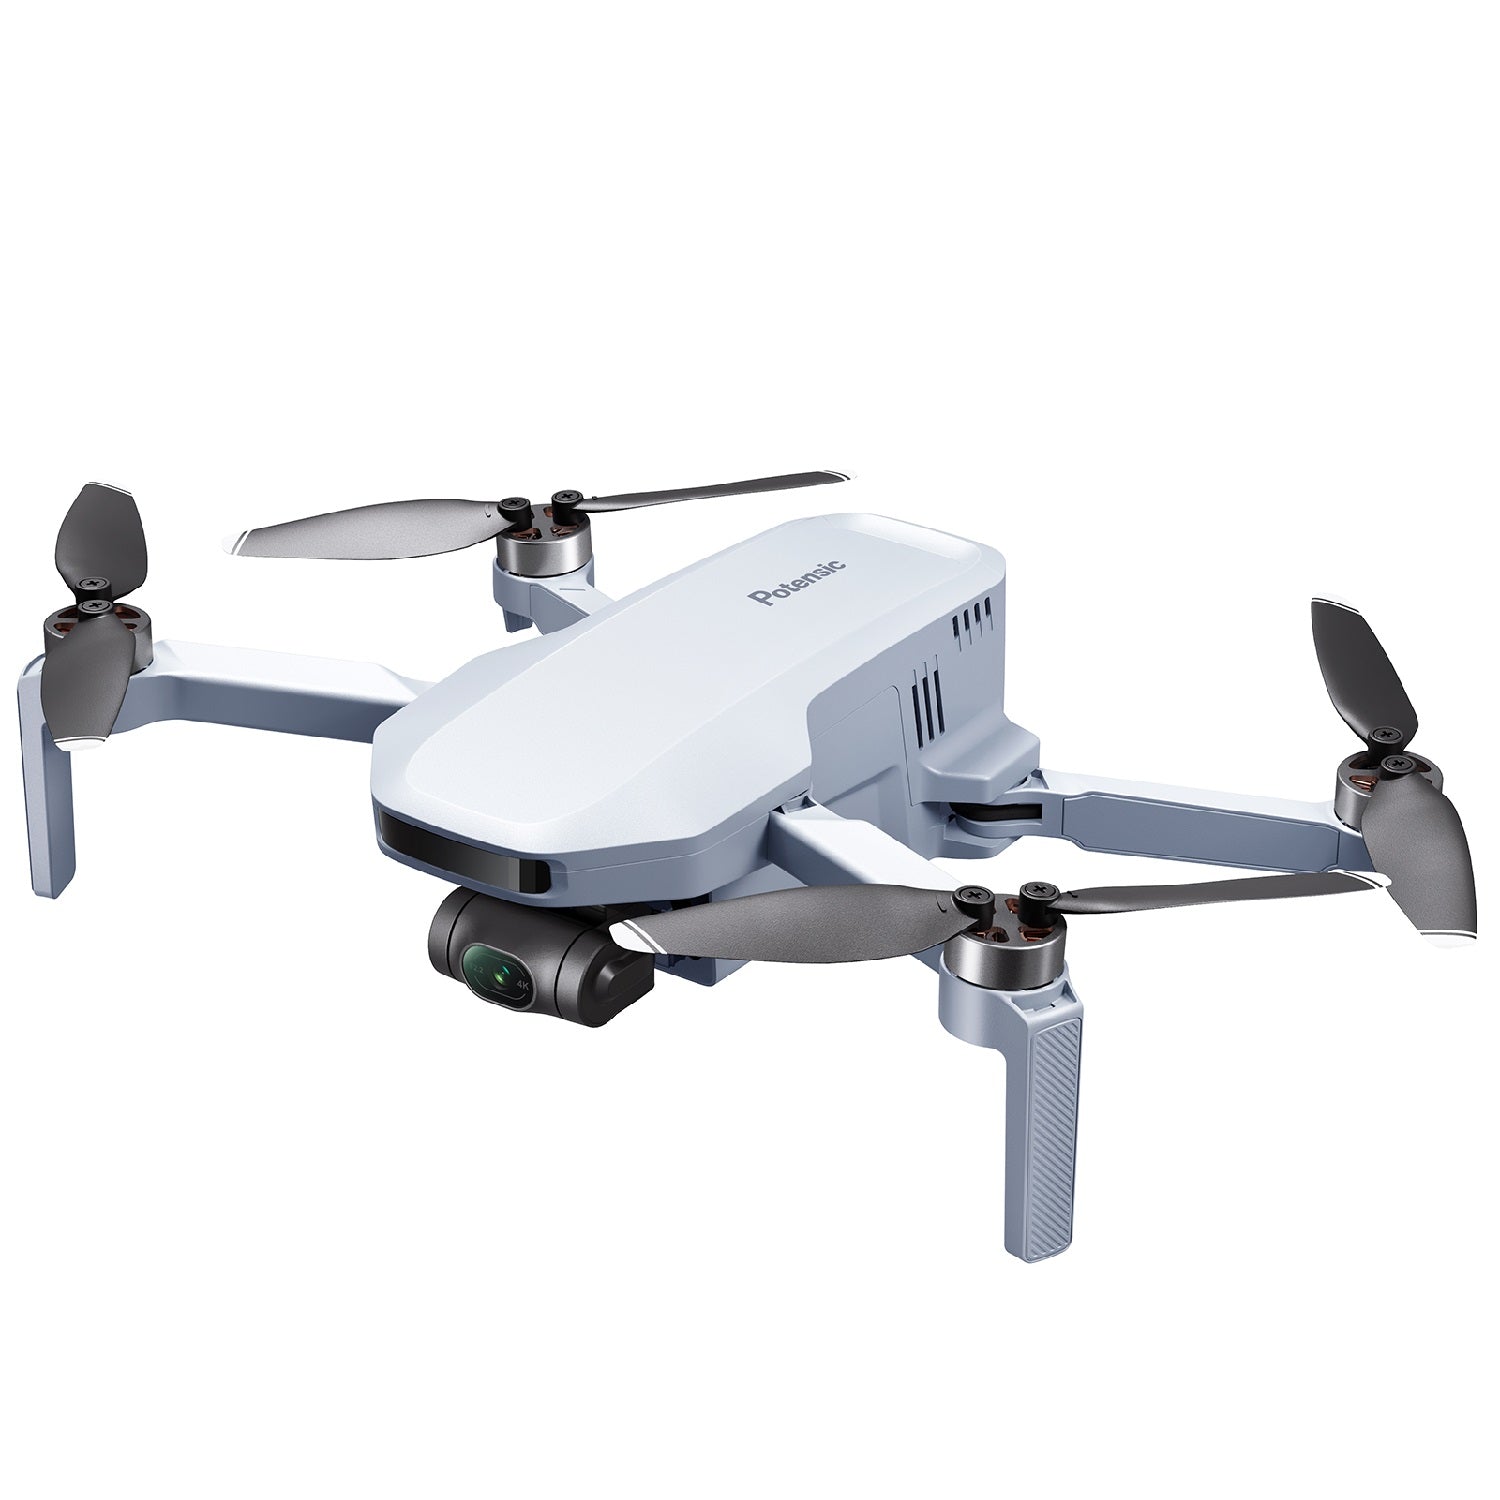 ATOM 4K GPS Drone with 3-Axis Gimbal, 6km Video Transmission, Visual Tracking